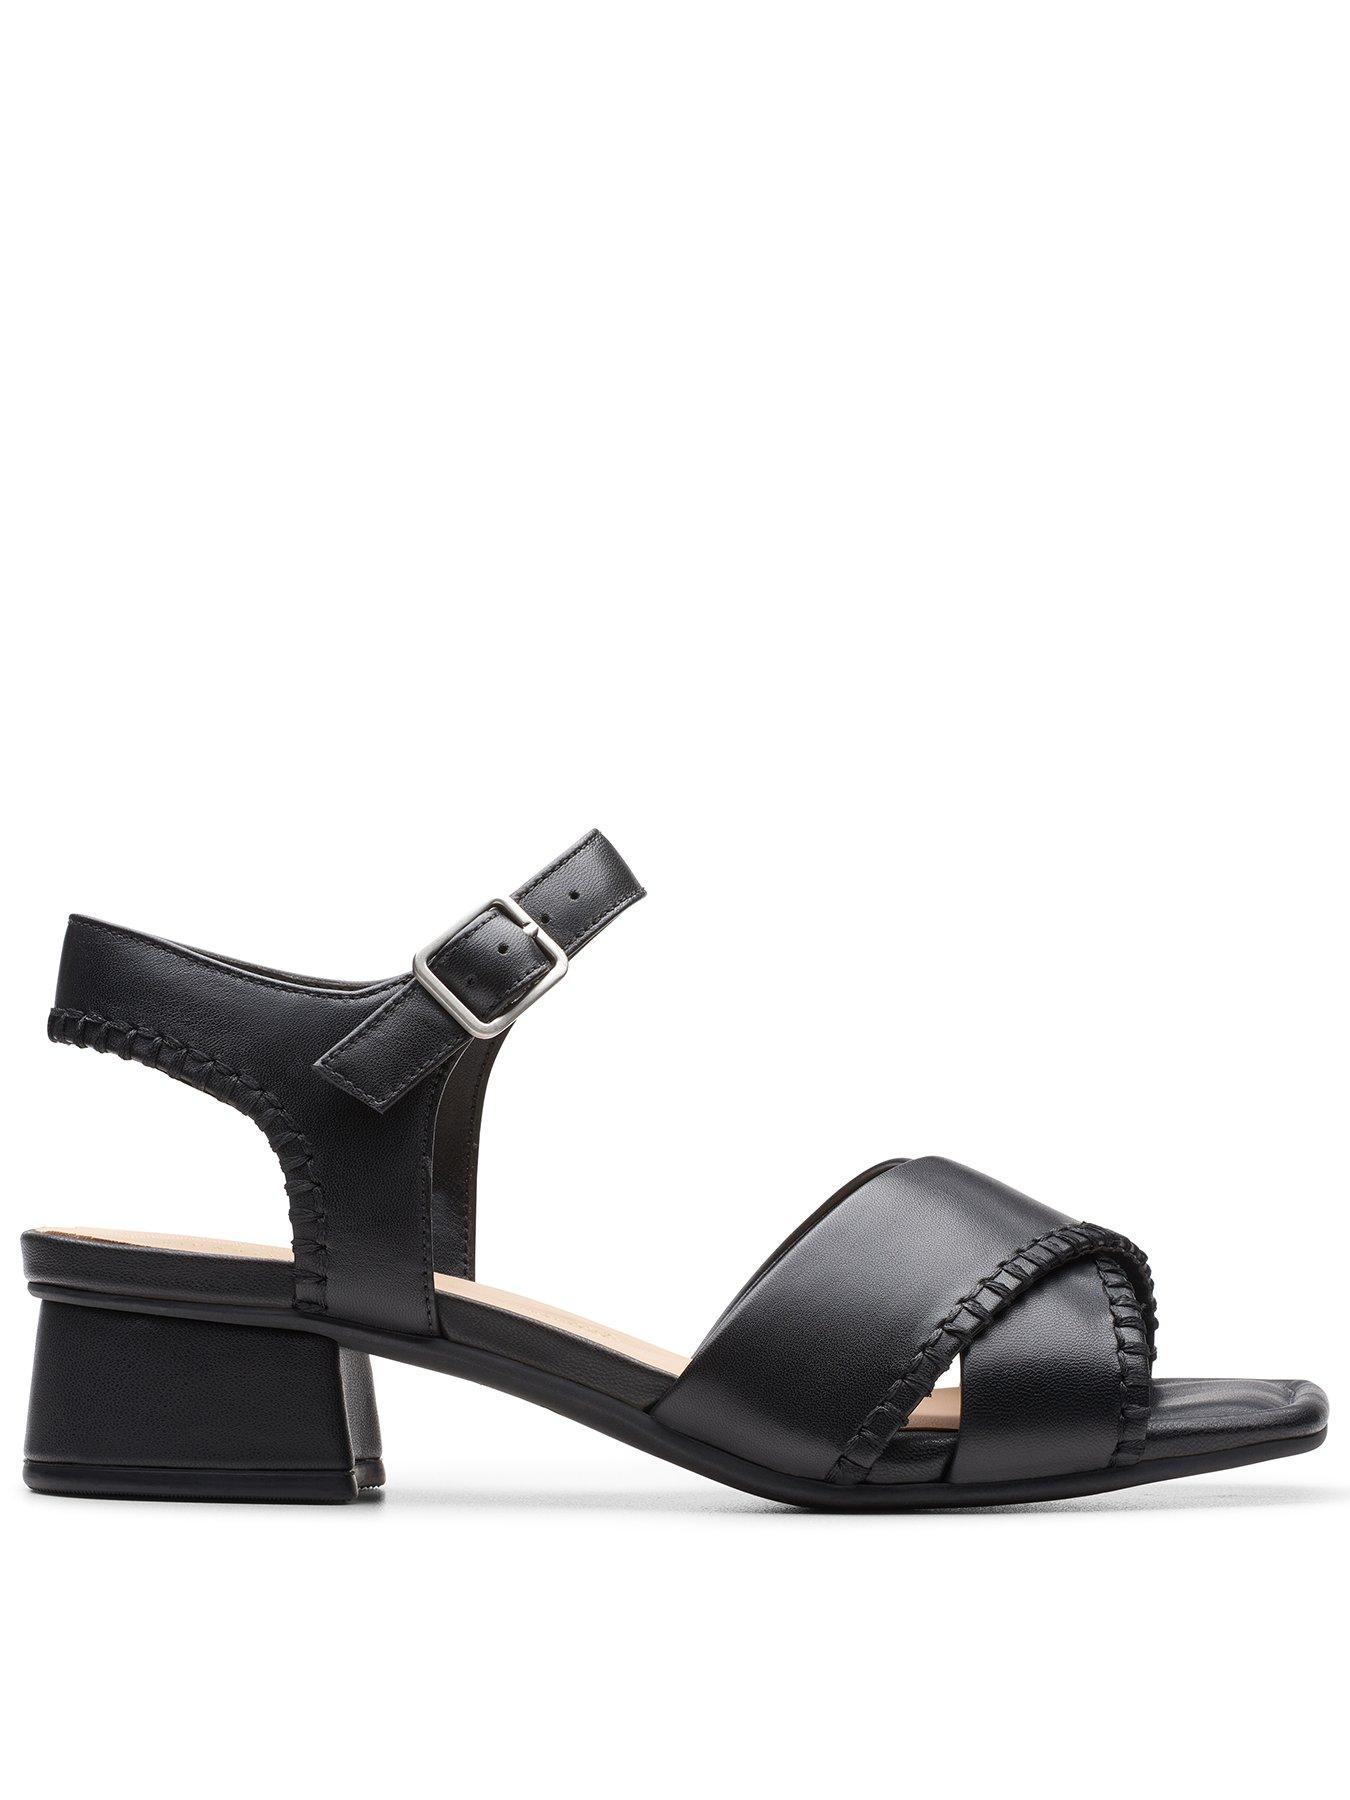 Clarks Serina35 Leather Wide Fitting Cross Front Mid Heel Sandals - Black